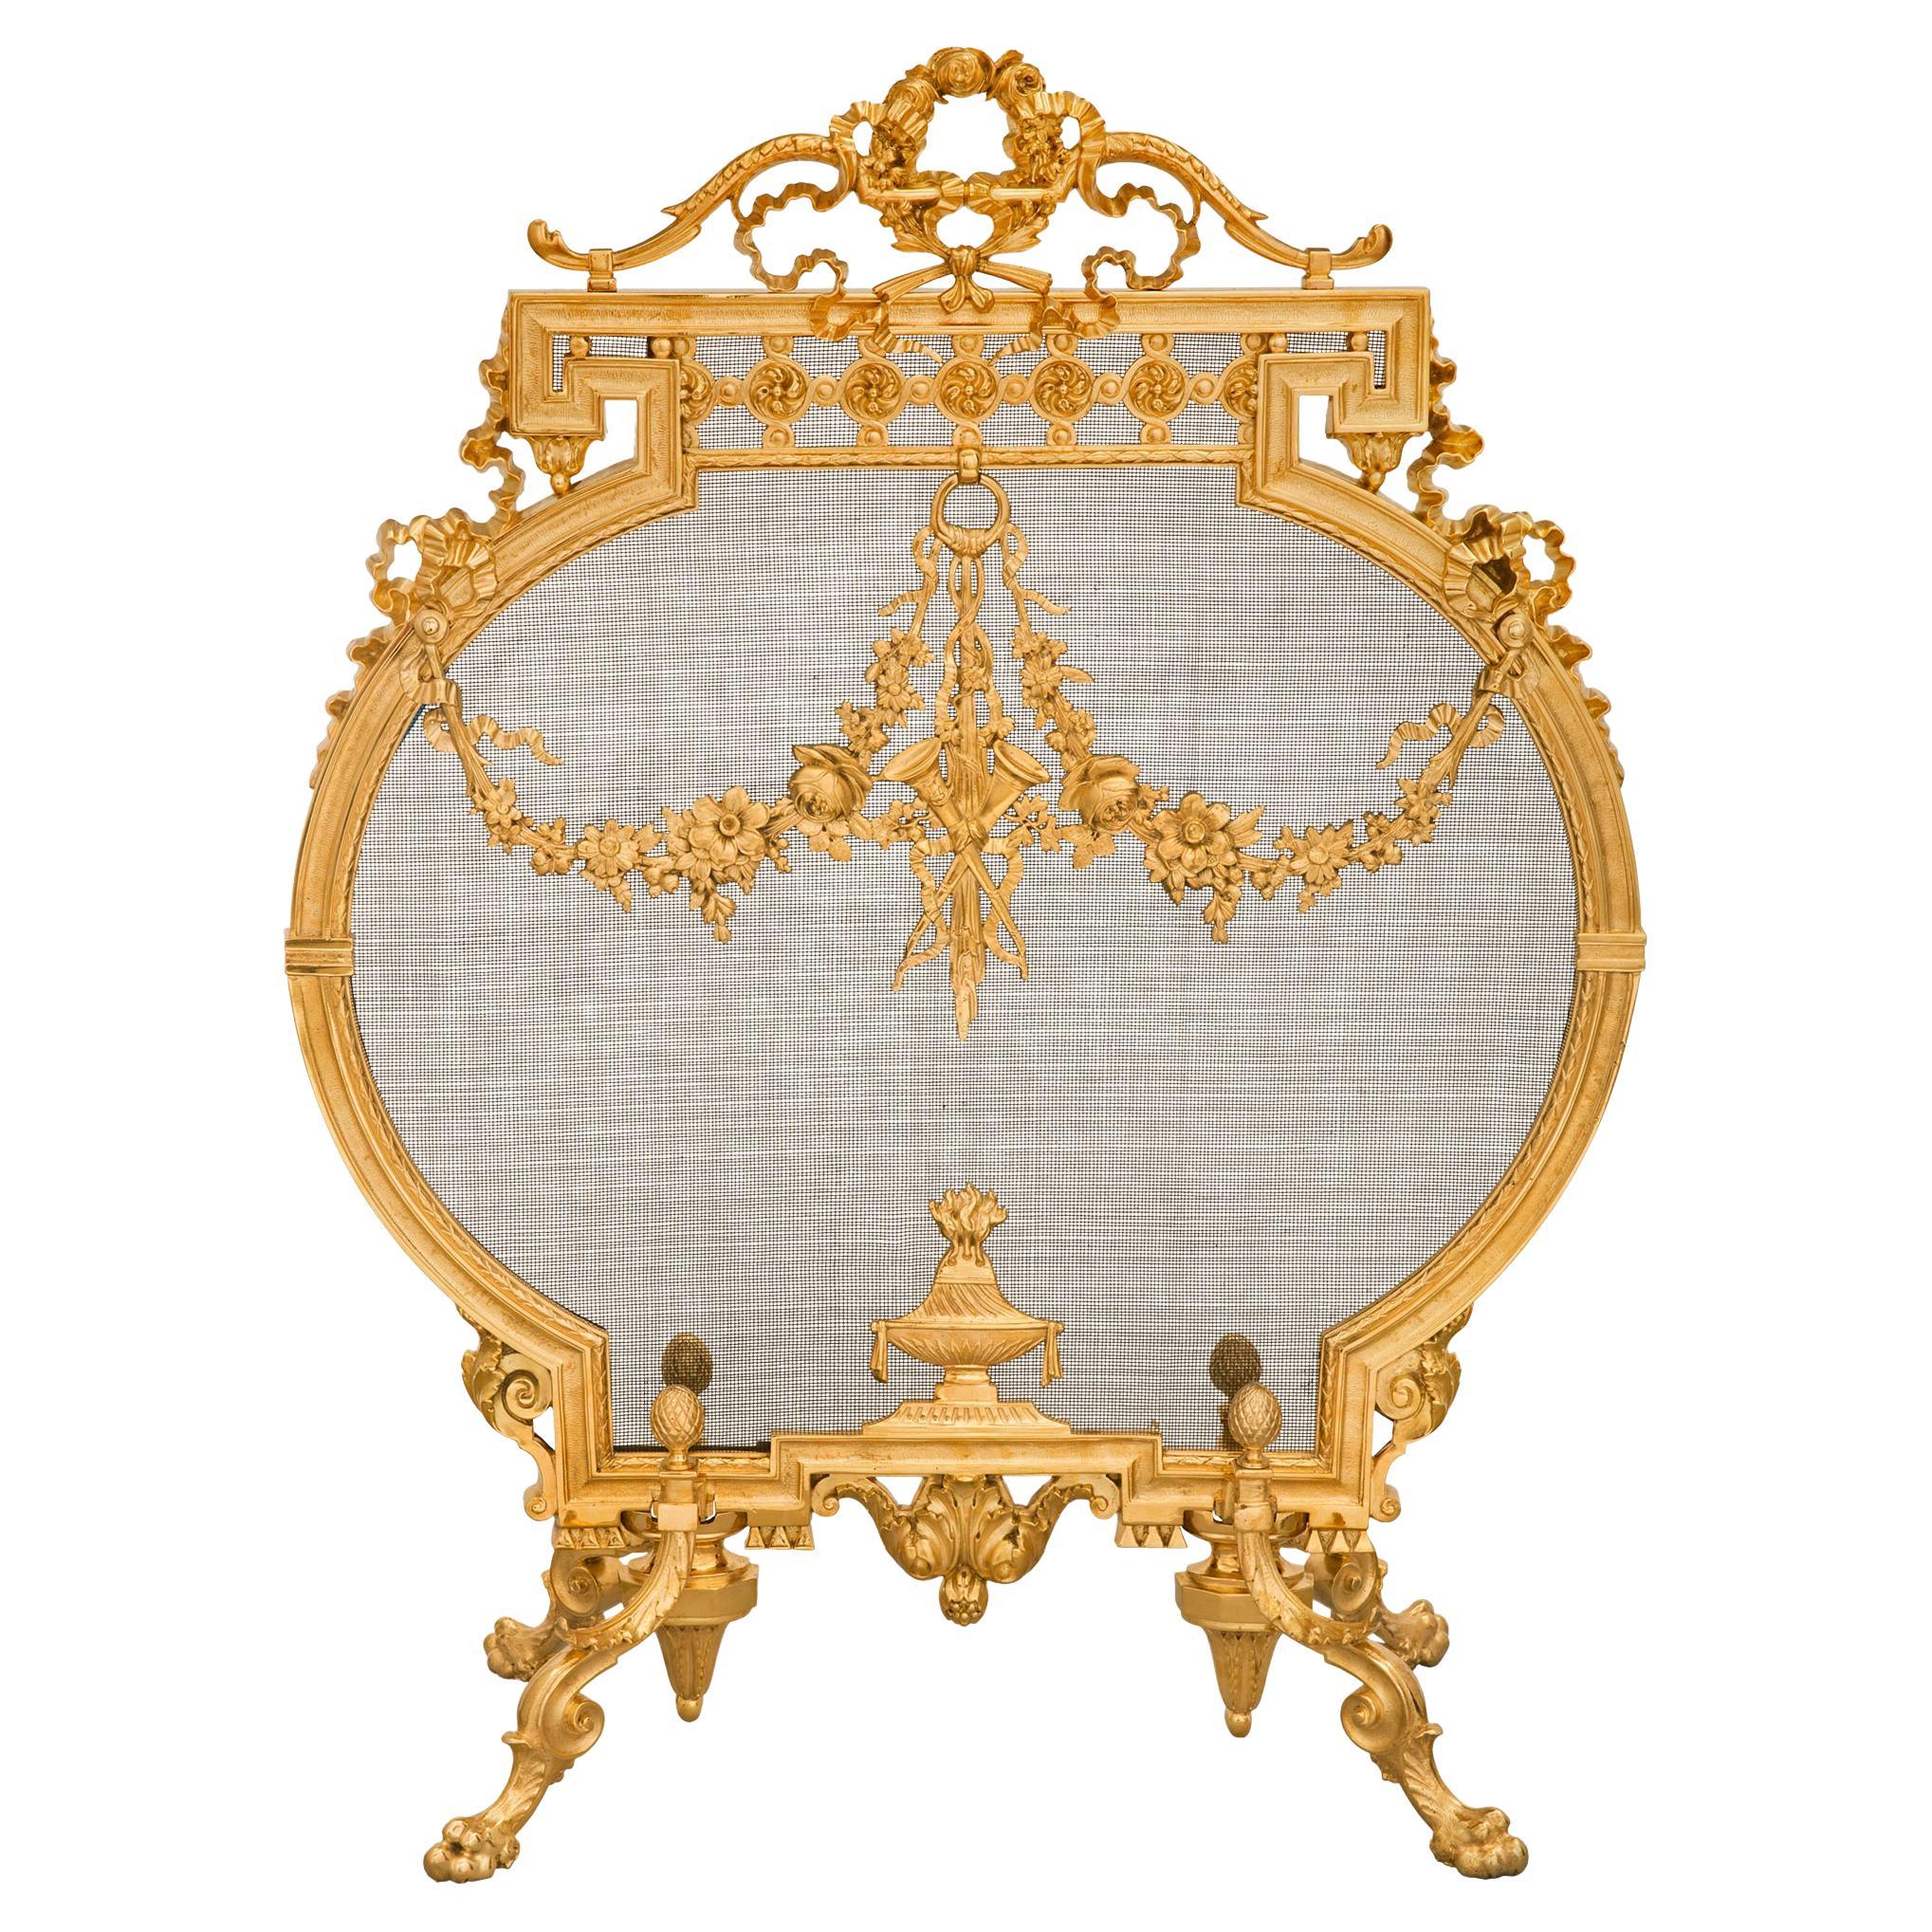 French 19th Century Neo-Classical St. Belle Époque Period Ormolu Fire Screen For Sale